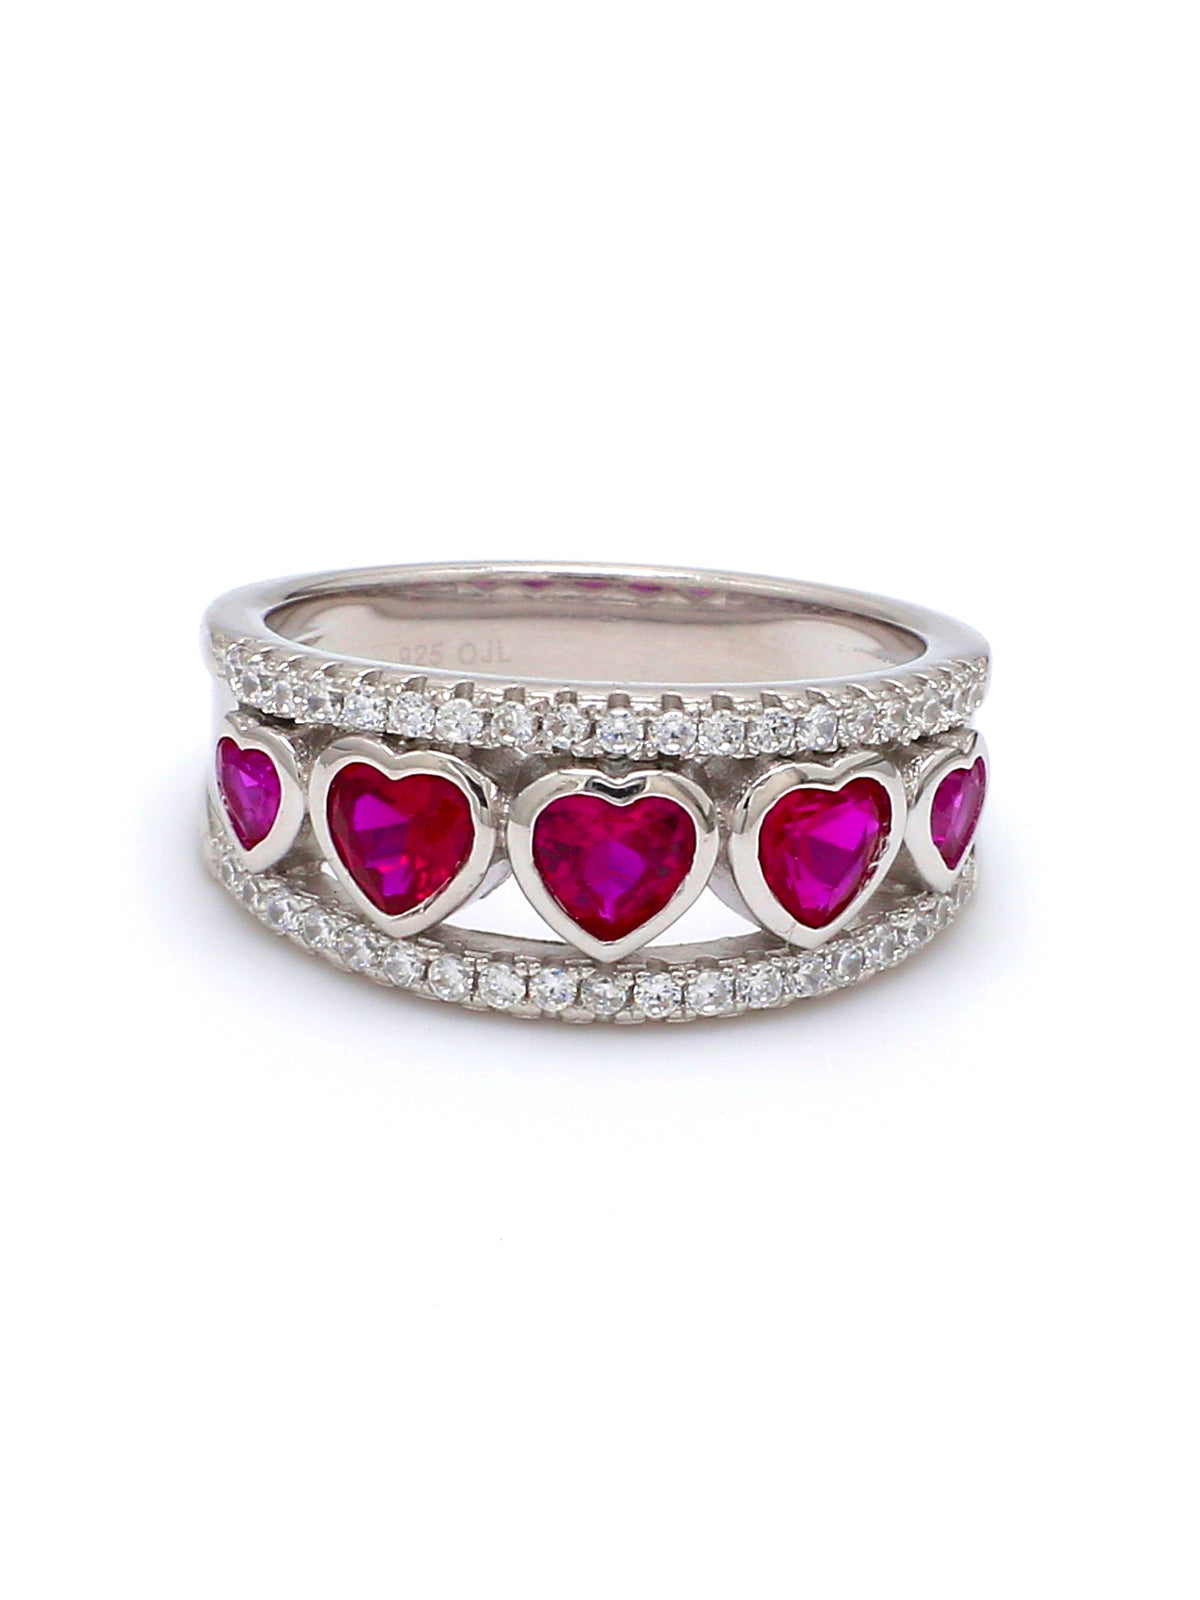 HEART RED RUBY RING FOR HER